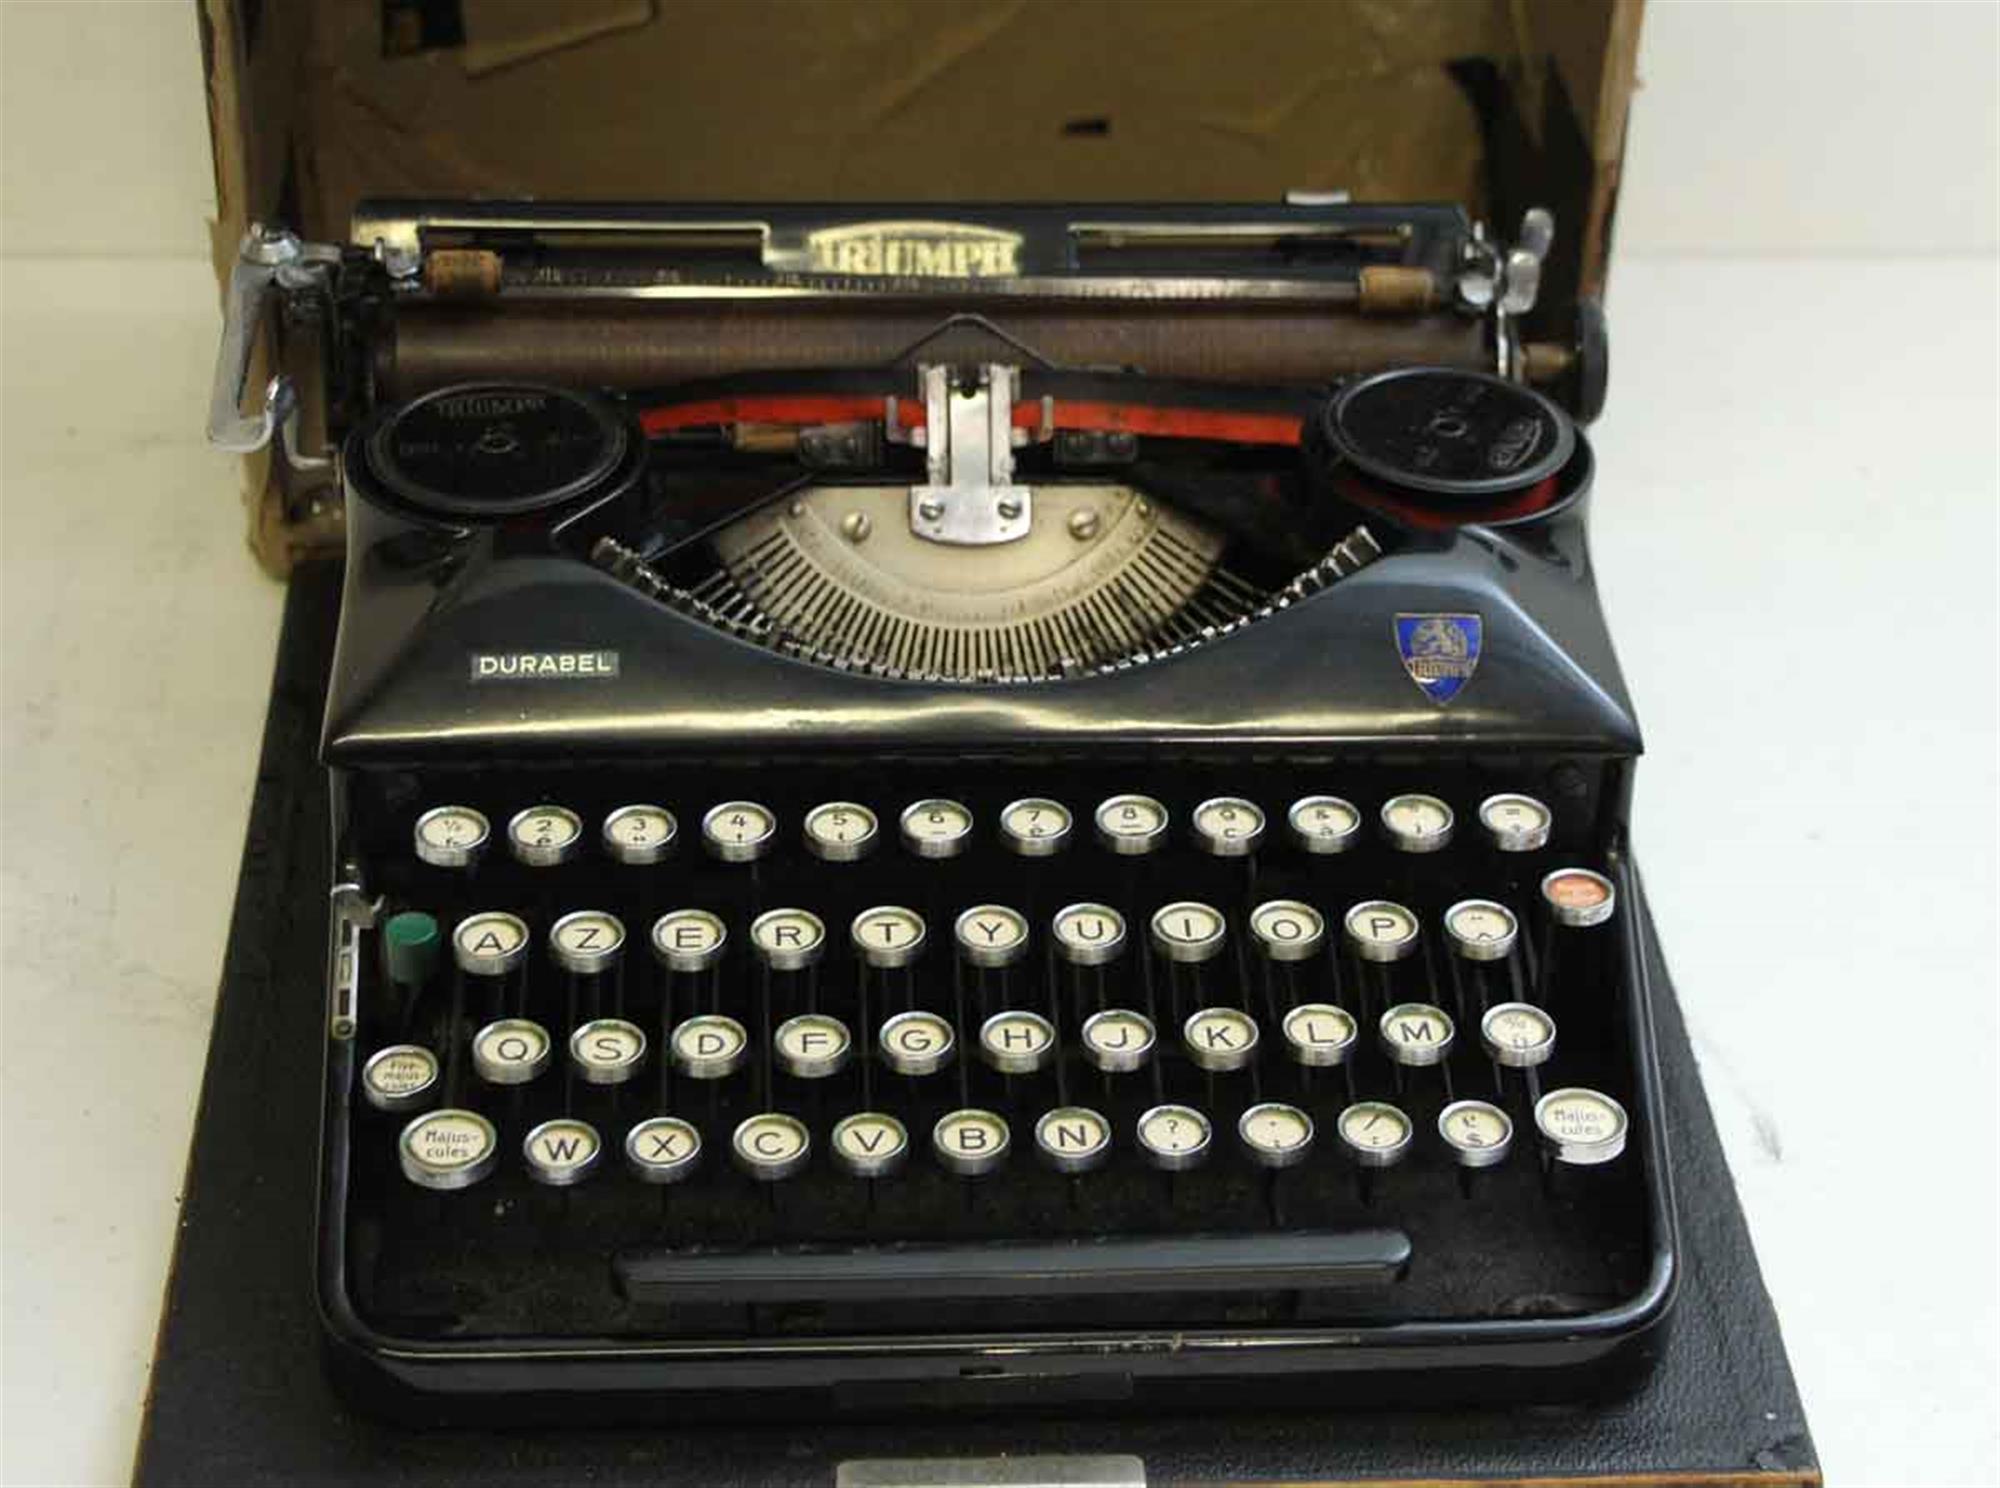 1940s French Triumph brand black vintage typewriter with original case. Please inquire about working condition. This can be seen at our 5 East 16th St location on Union Square in Manhattan.